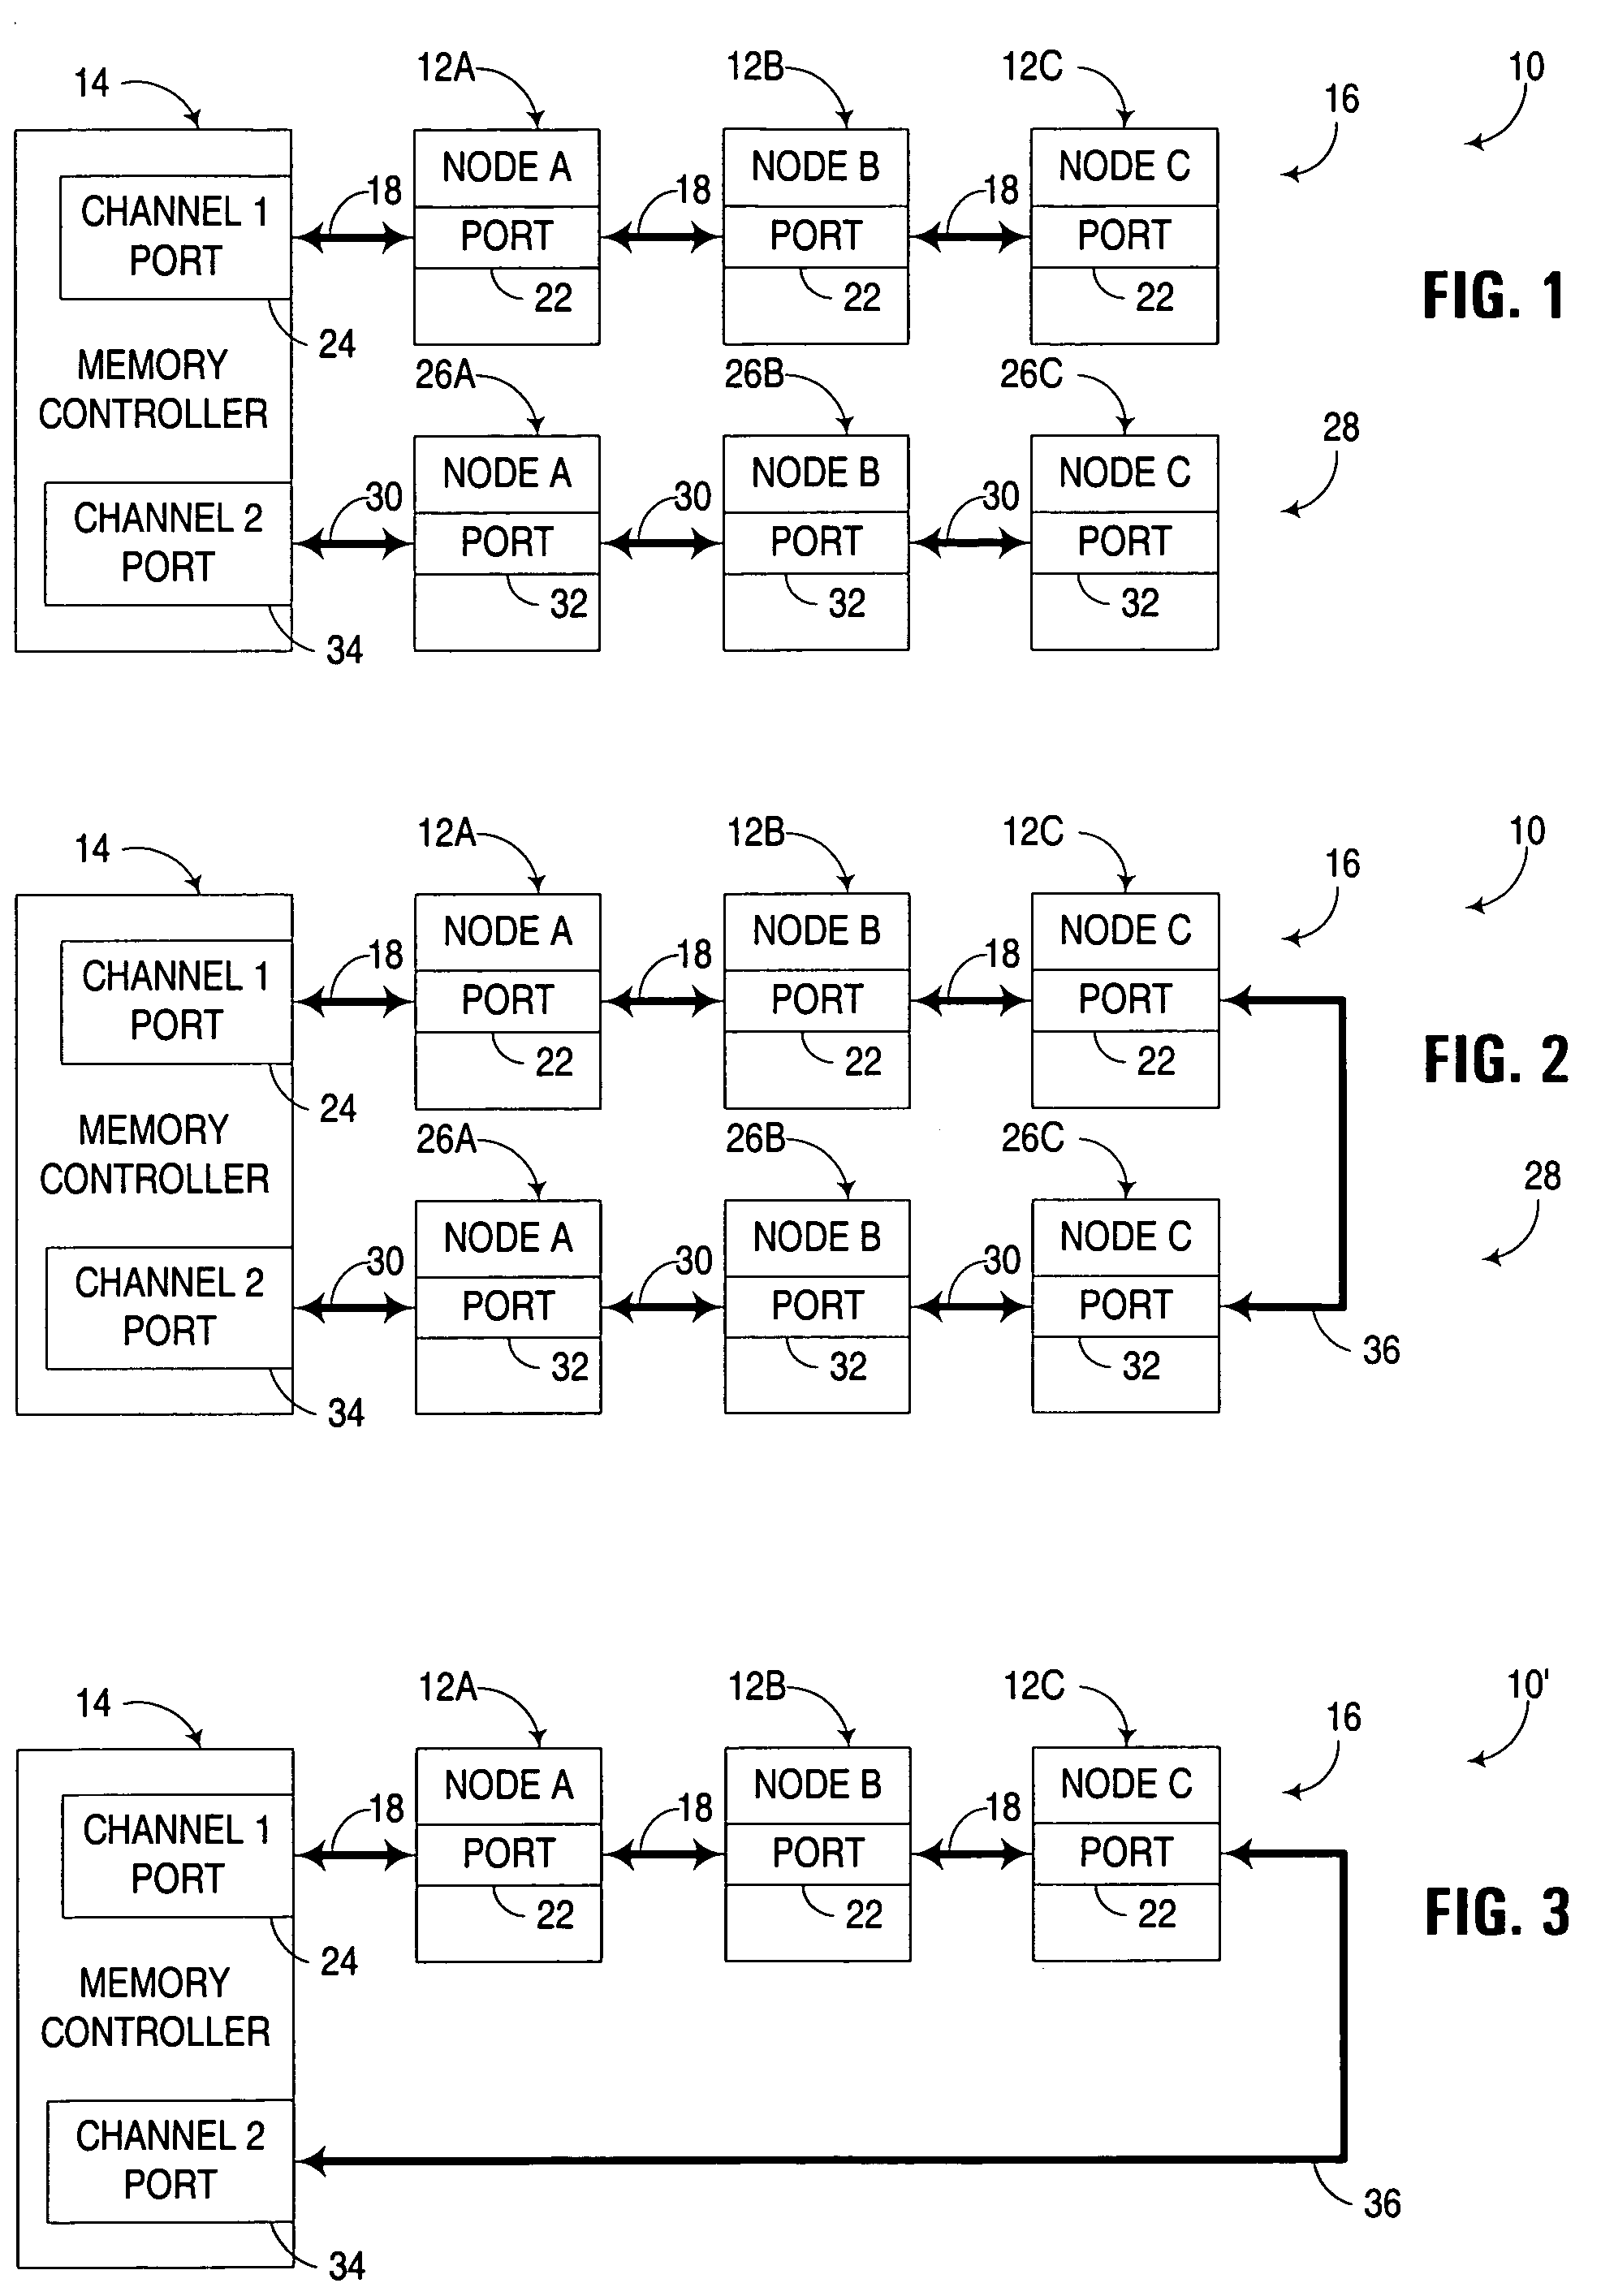 Multi-channel memory architecture for daisy chained arrangements of nodes with bridging between memory channels